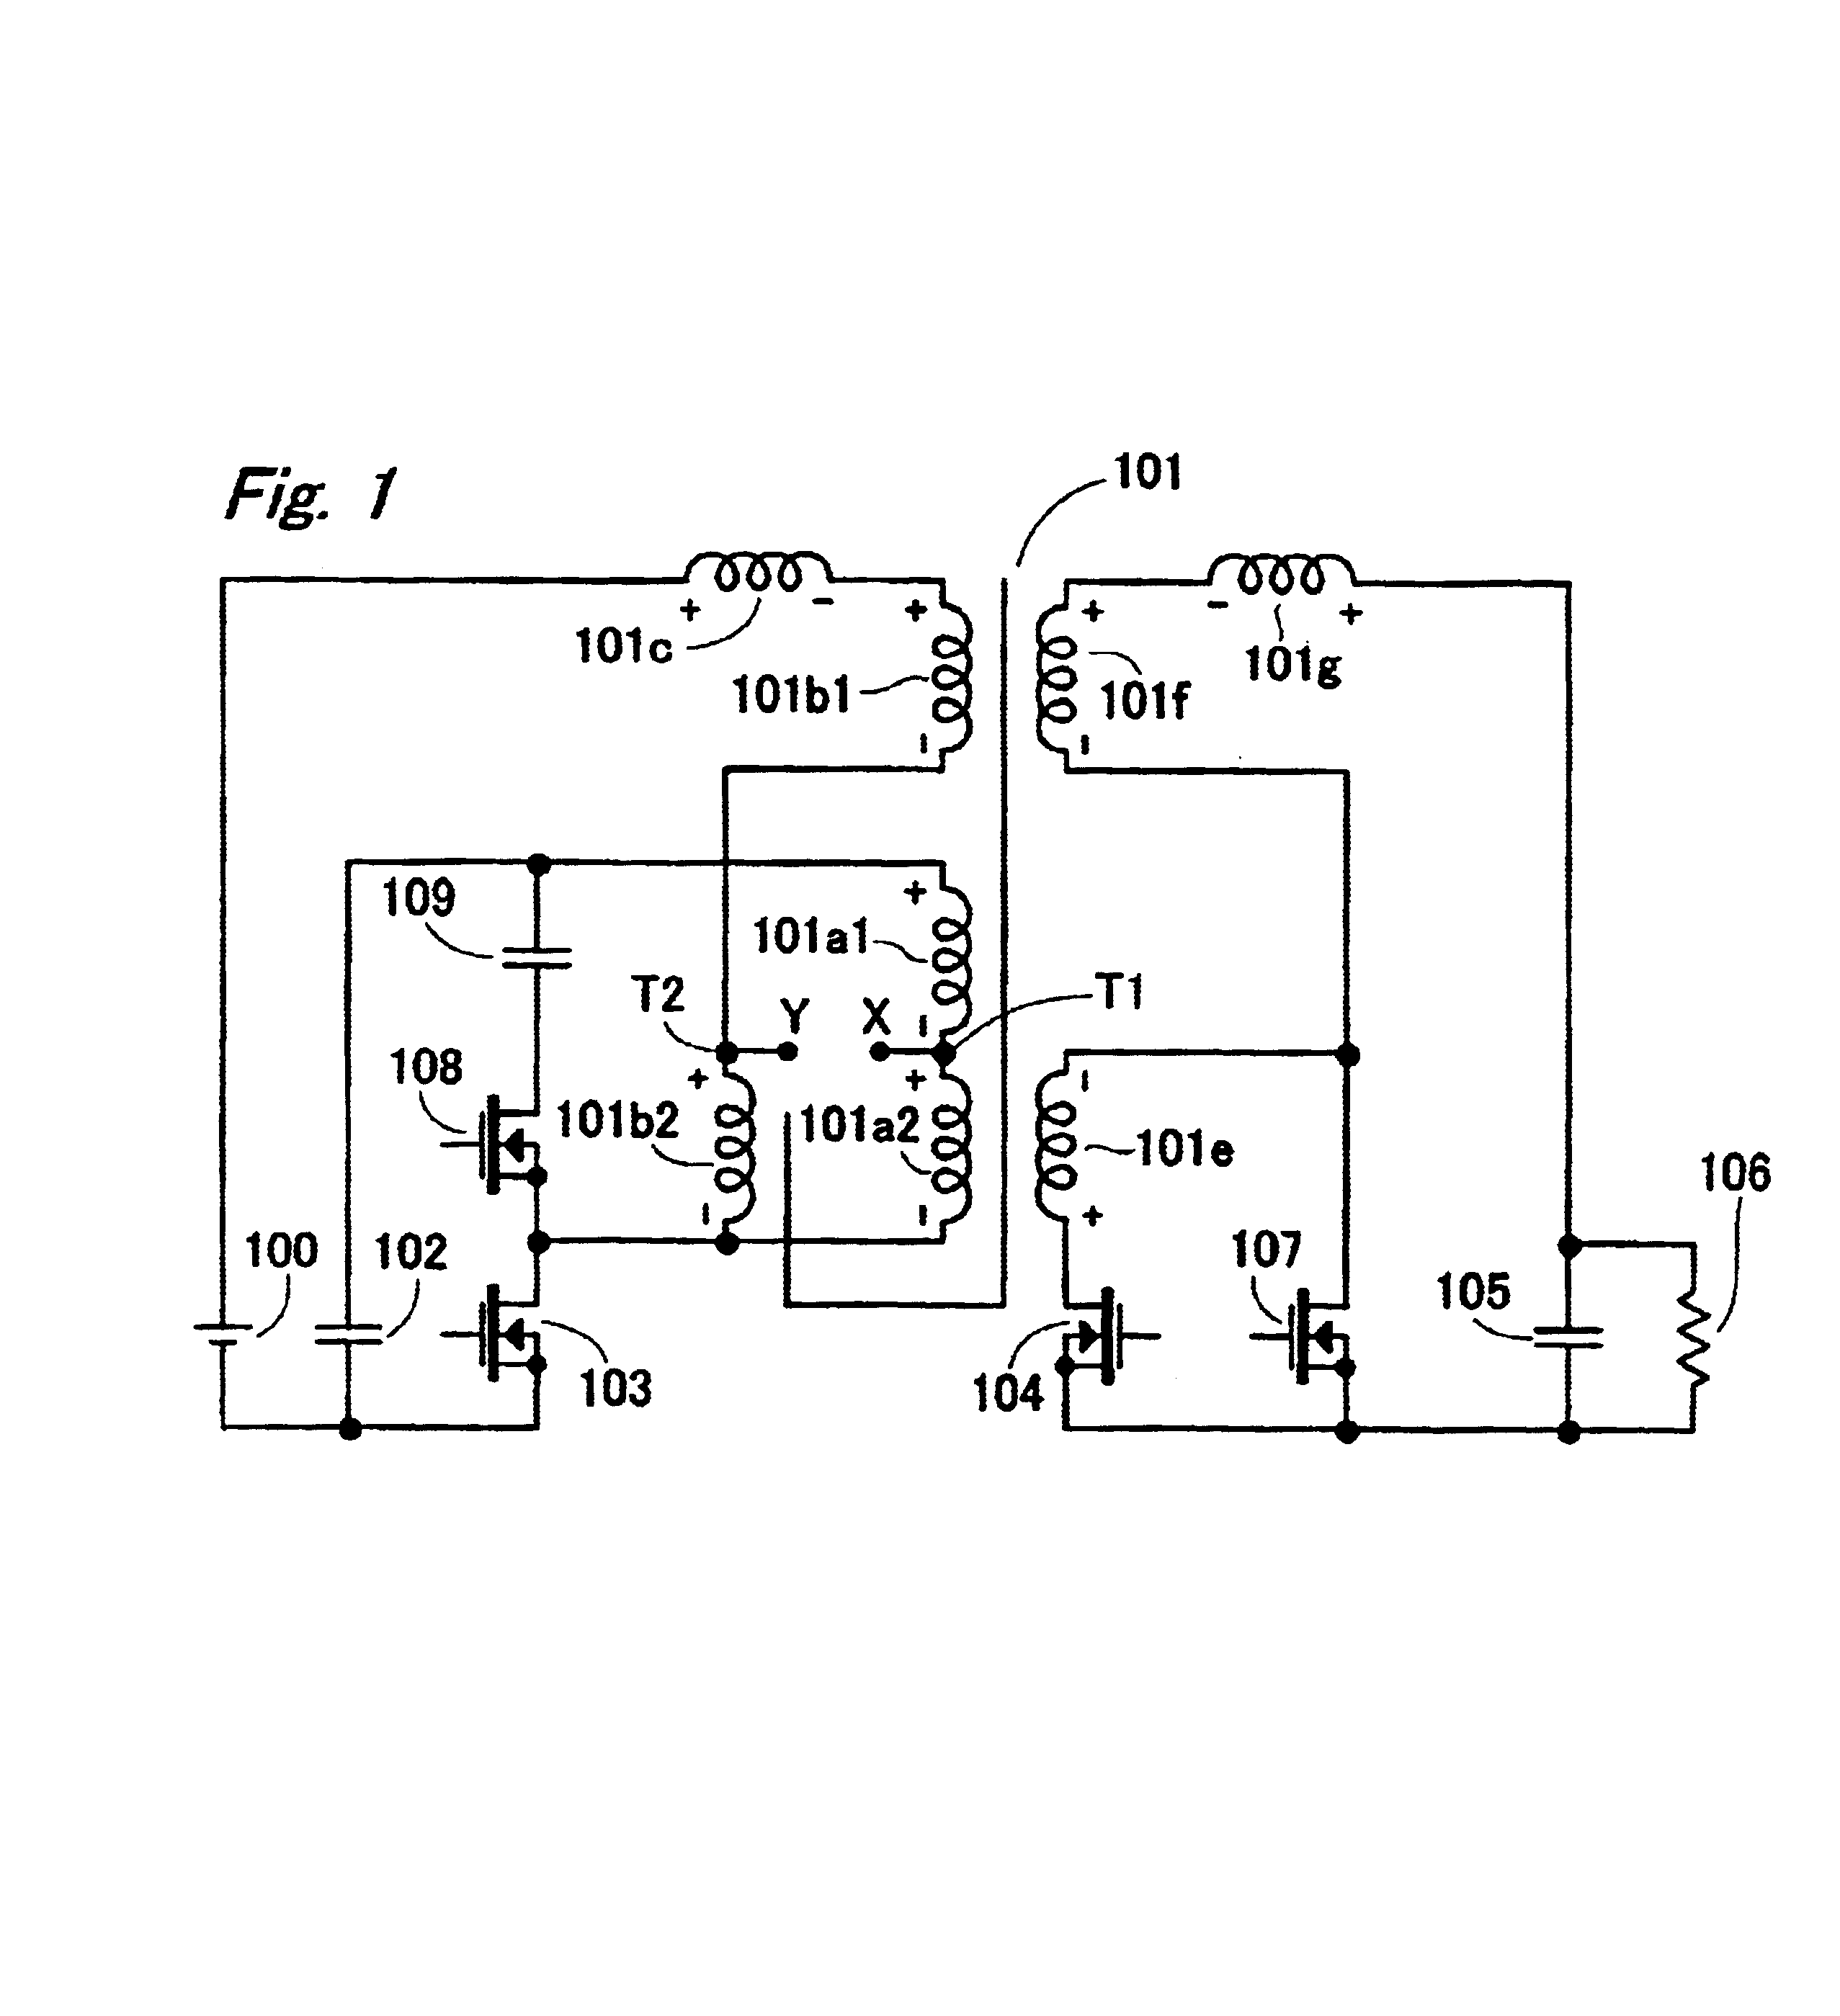 Switching power supply apparatus